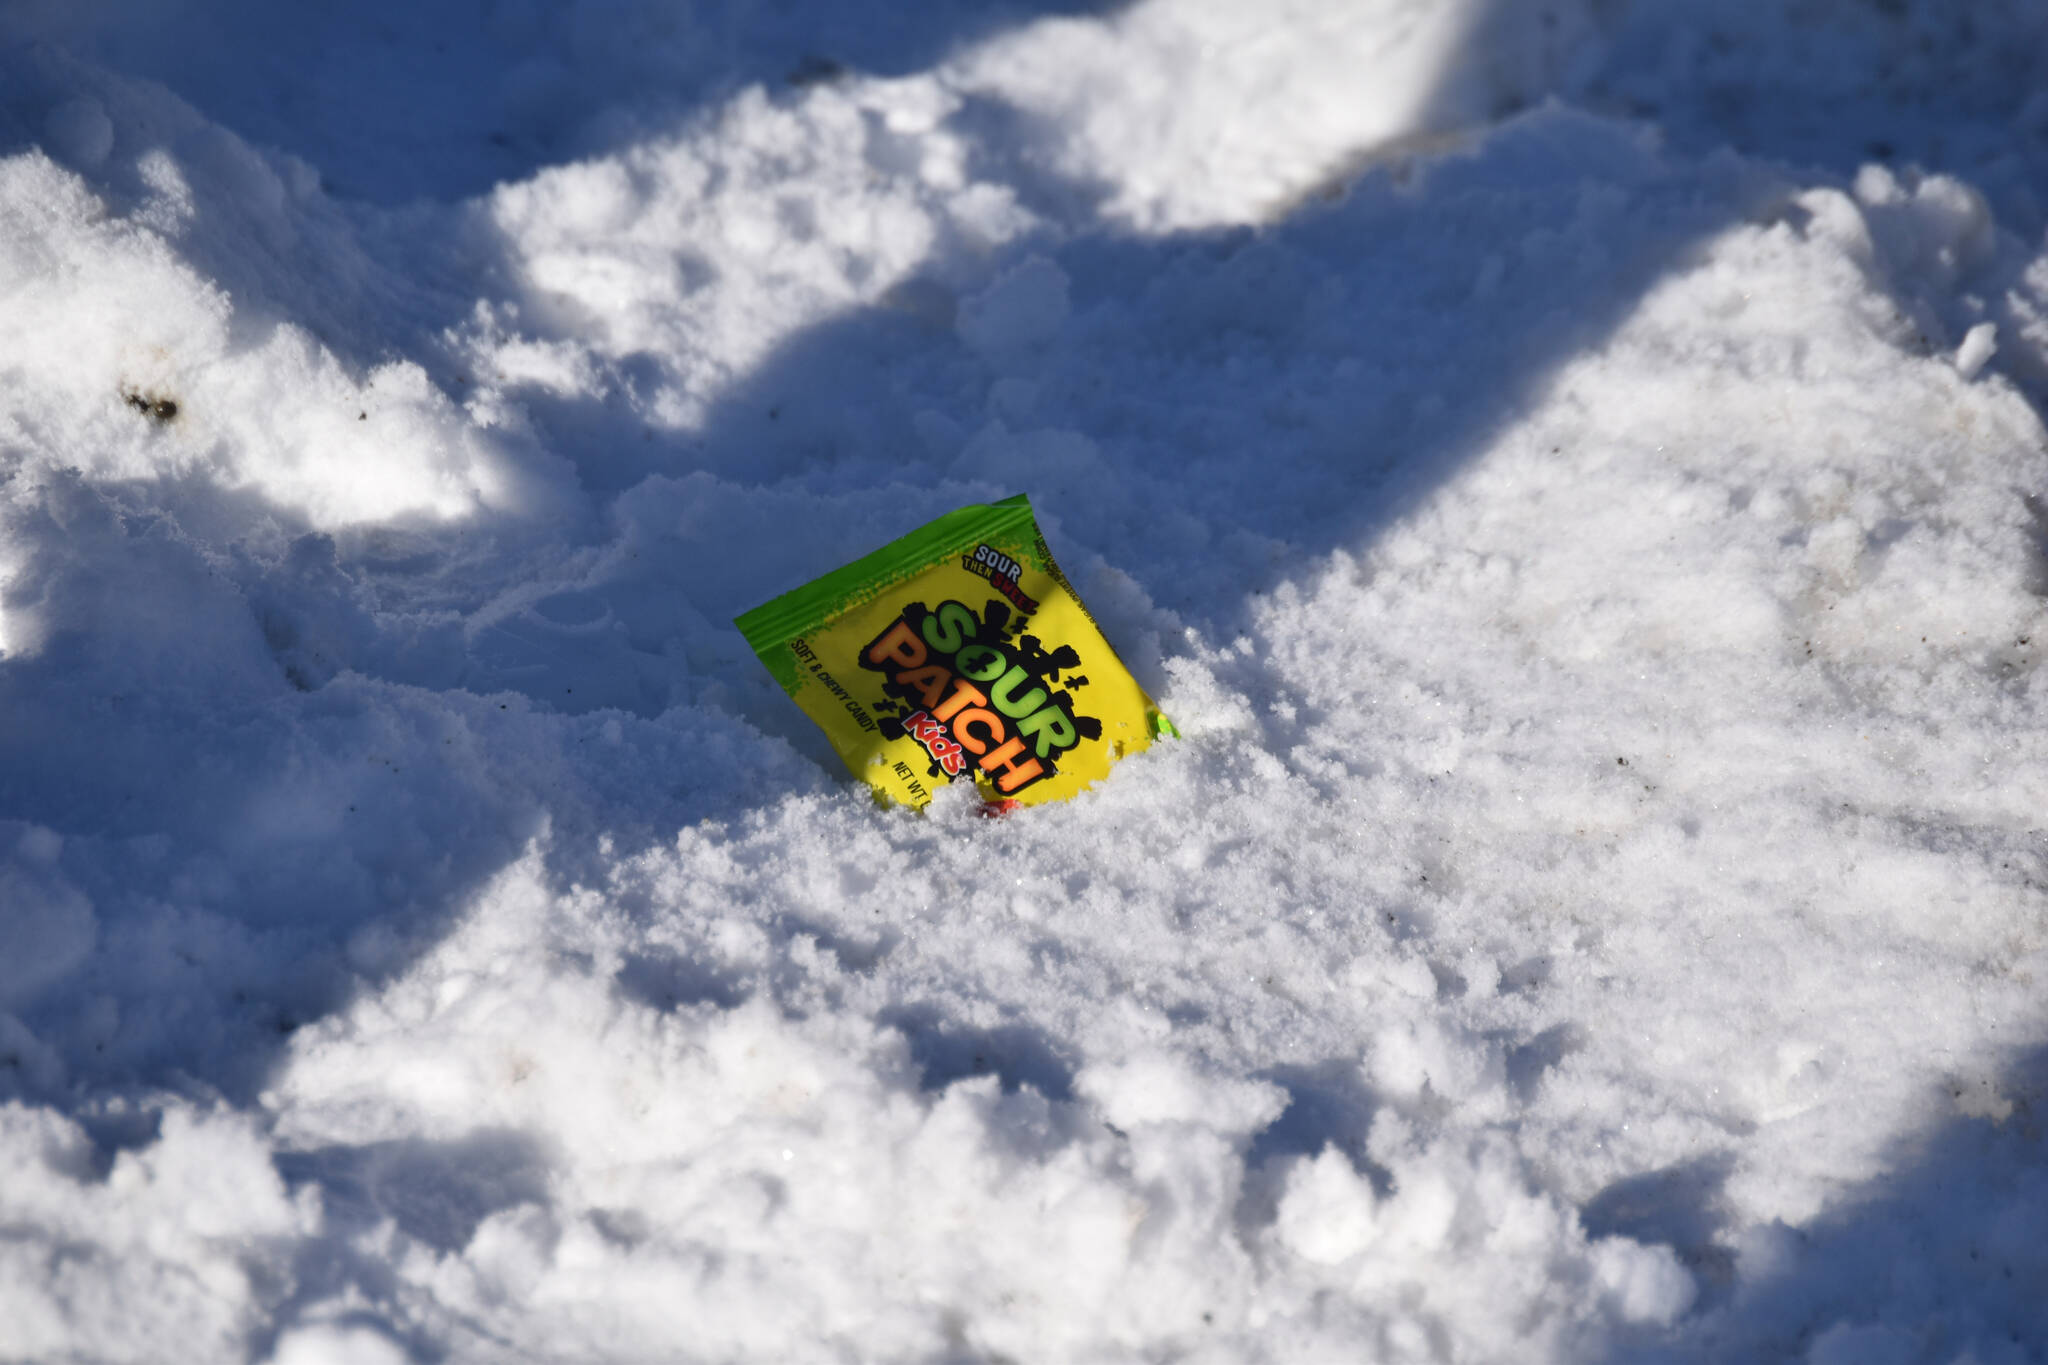 A bag of Sour Patch Kids rest in the snow as the 32nd annual Sweeney’s St. Patrick’s Day Parade proceeds down Fireweed Street in Soldotna, Alaska on Friday, March 17, 2023. (Jake Dye/Peninsula Clarion)